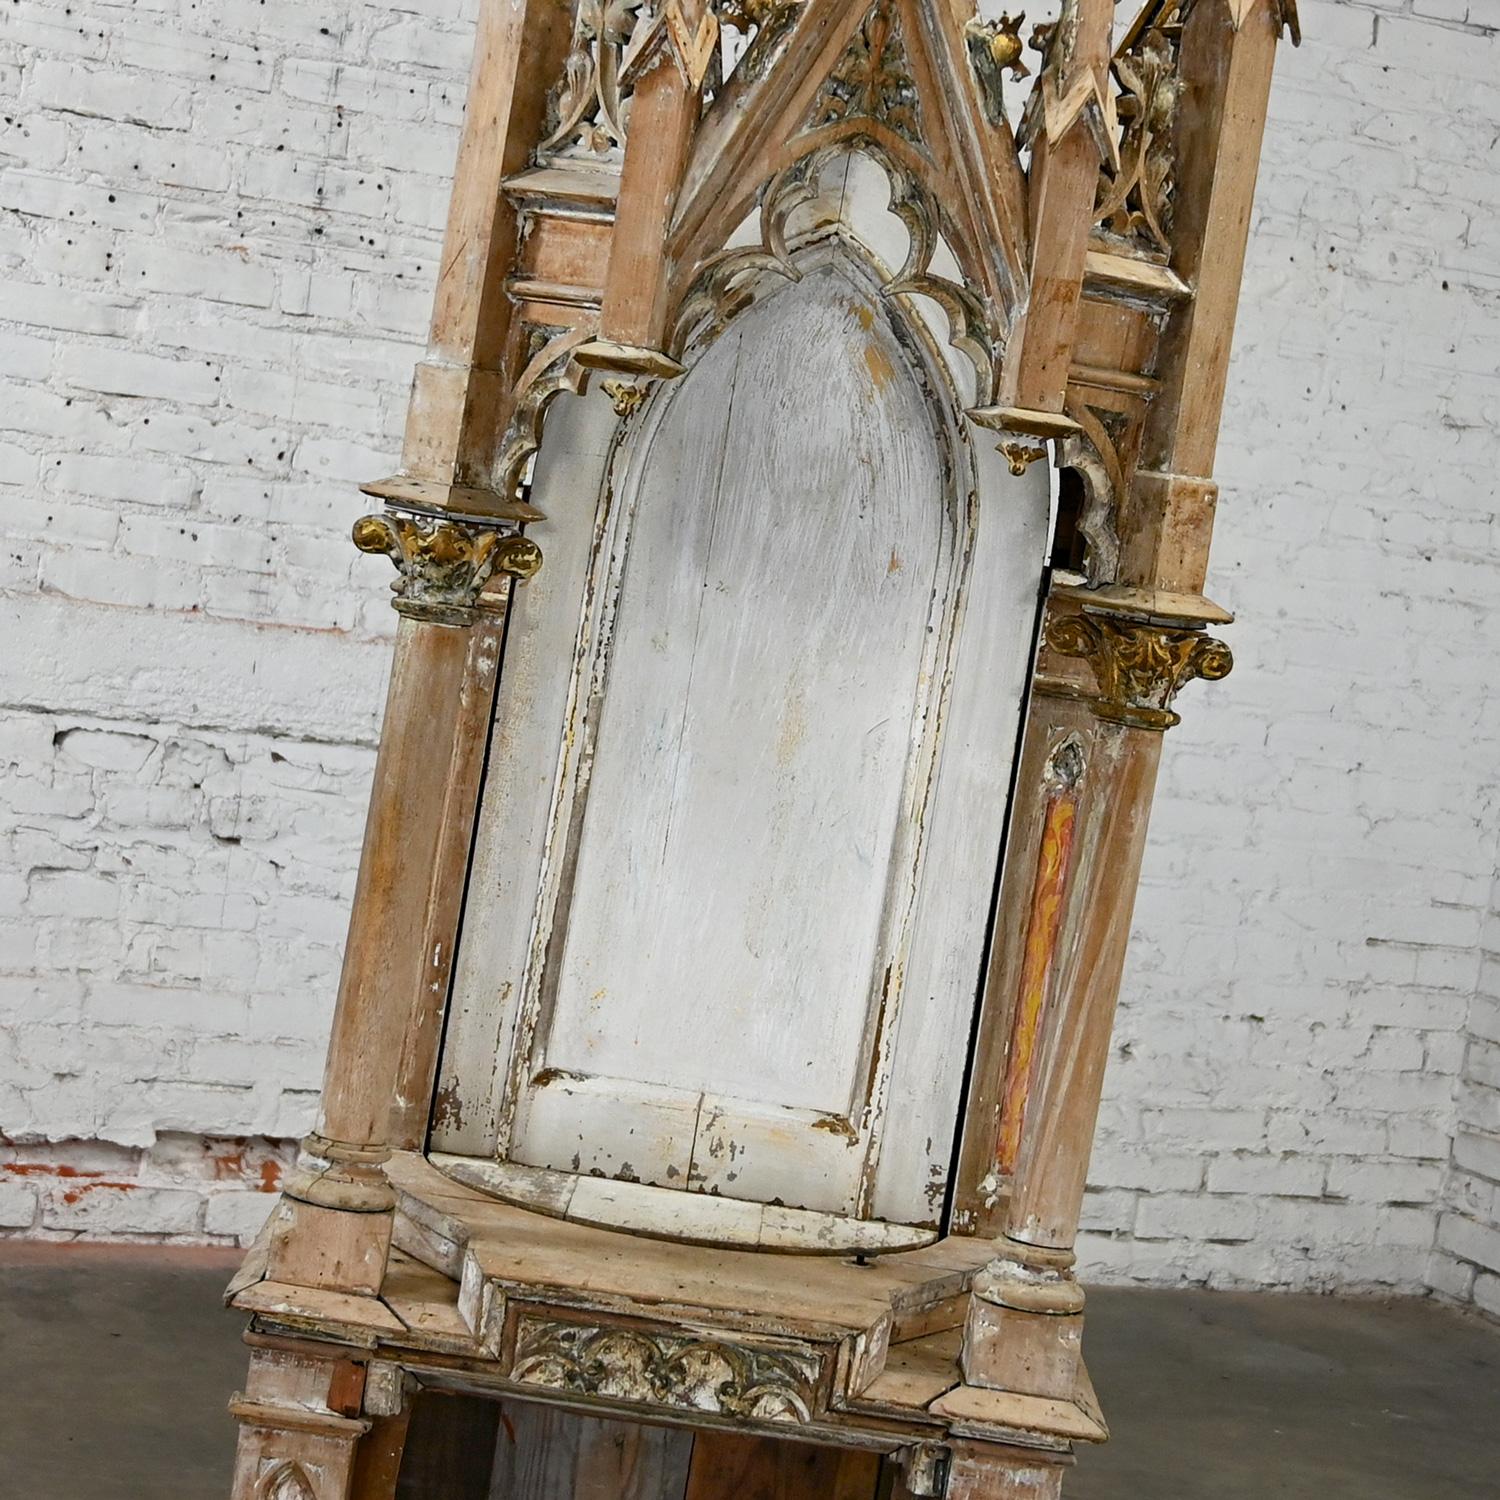 Gothic Architectural Church Spire or Steeple Pivoting Shrine Distressed Finish  In Good Condition For Sale In Topeka, KS